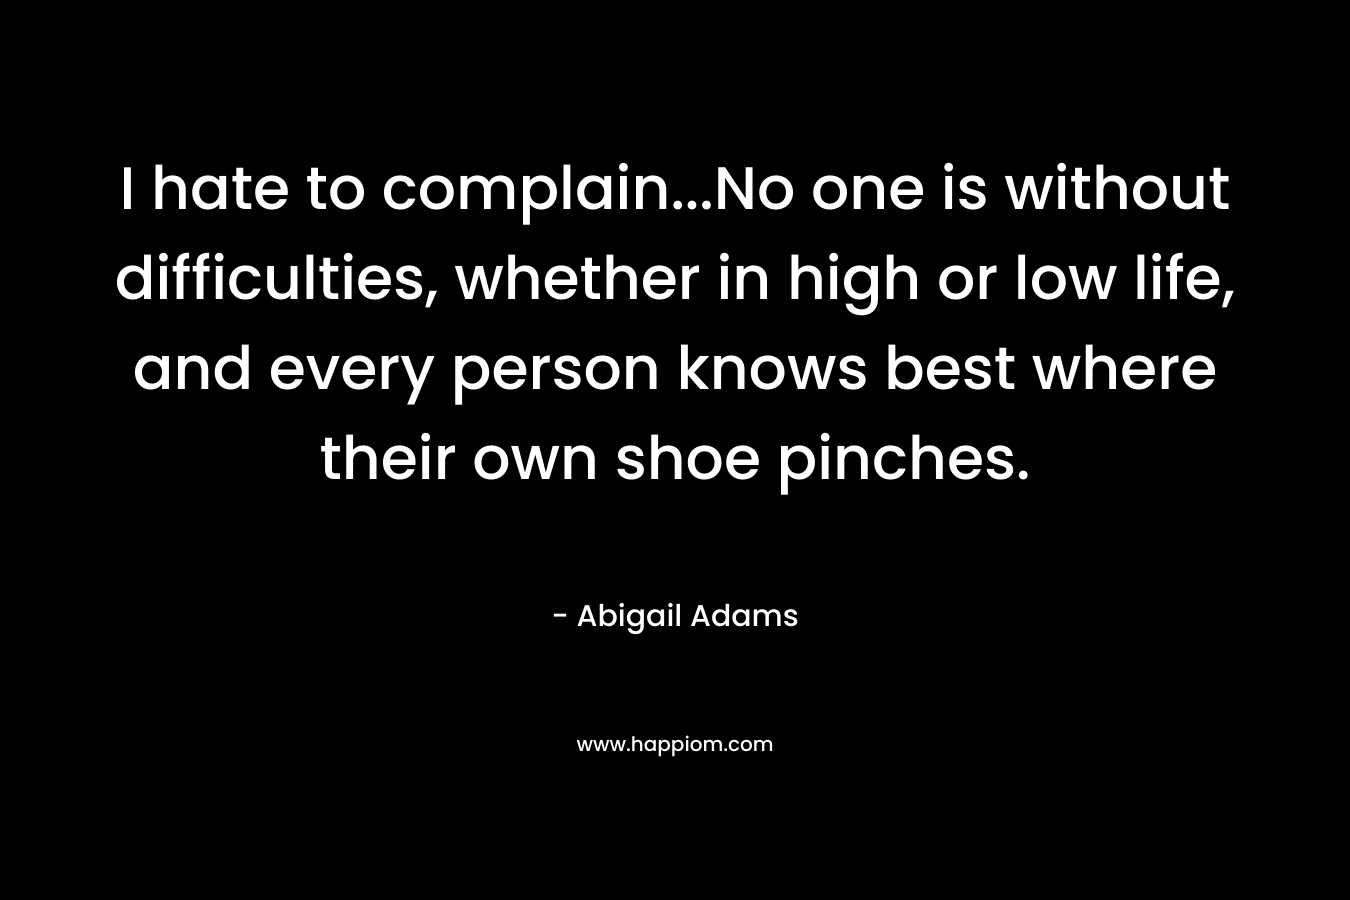 I hate to complain...No one is without difficulties, whether in high or low life, and every person knows best where their own shoe pinches.